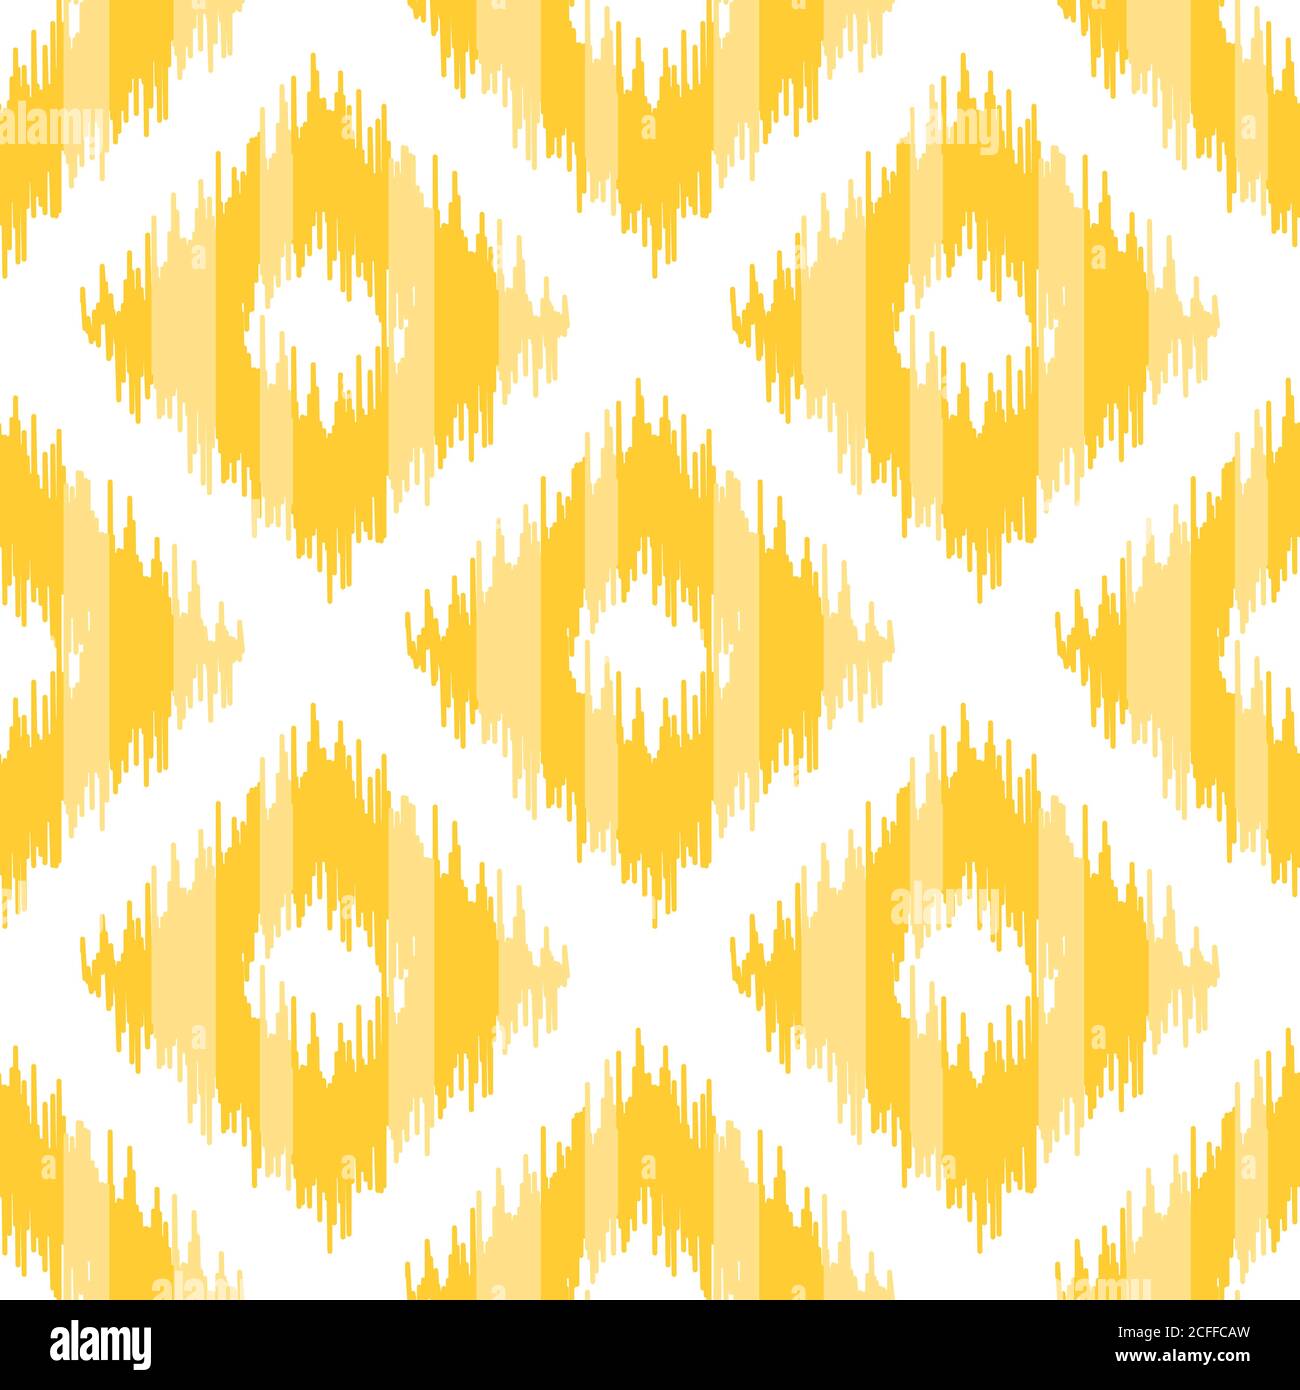 Seamless geometric pattern, based on ikat fabric style. Vector illustration. Yellow diamond shapes on white background. Stock Vector